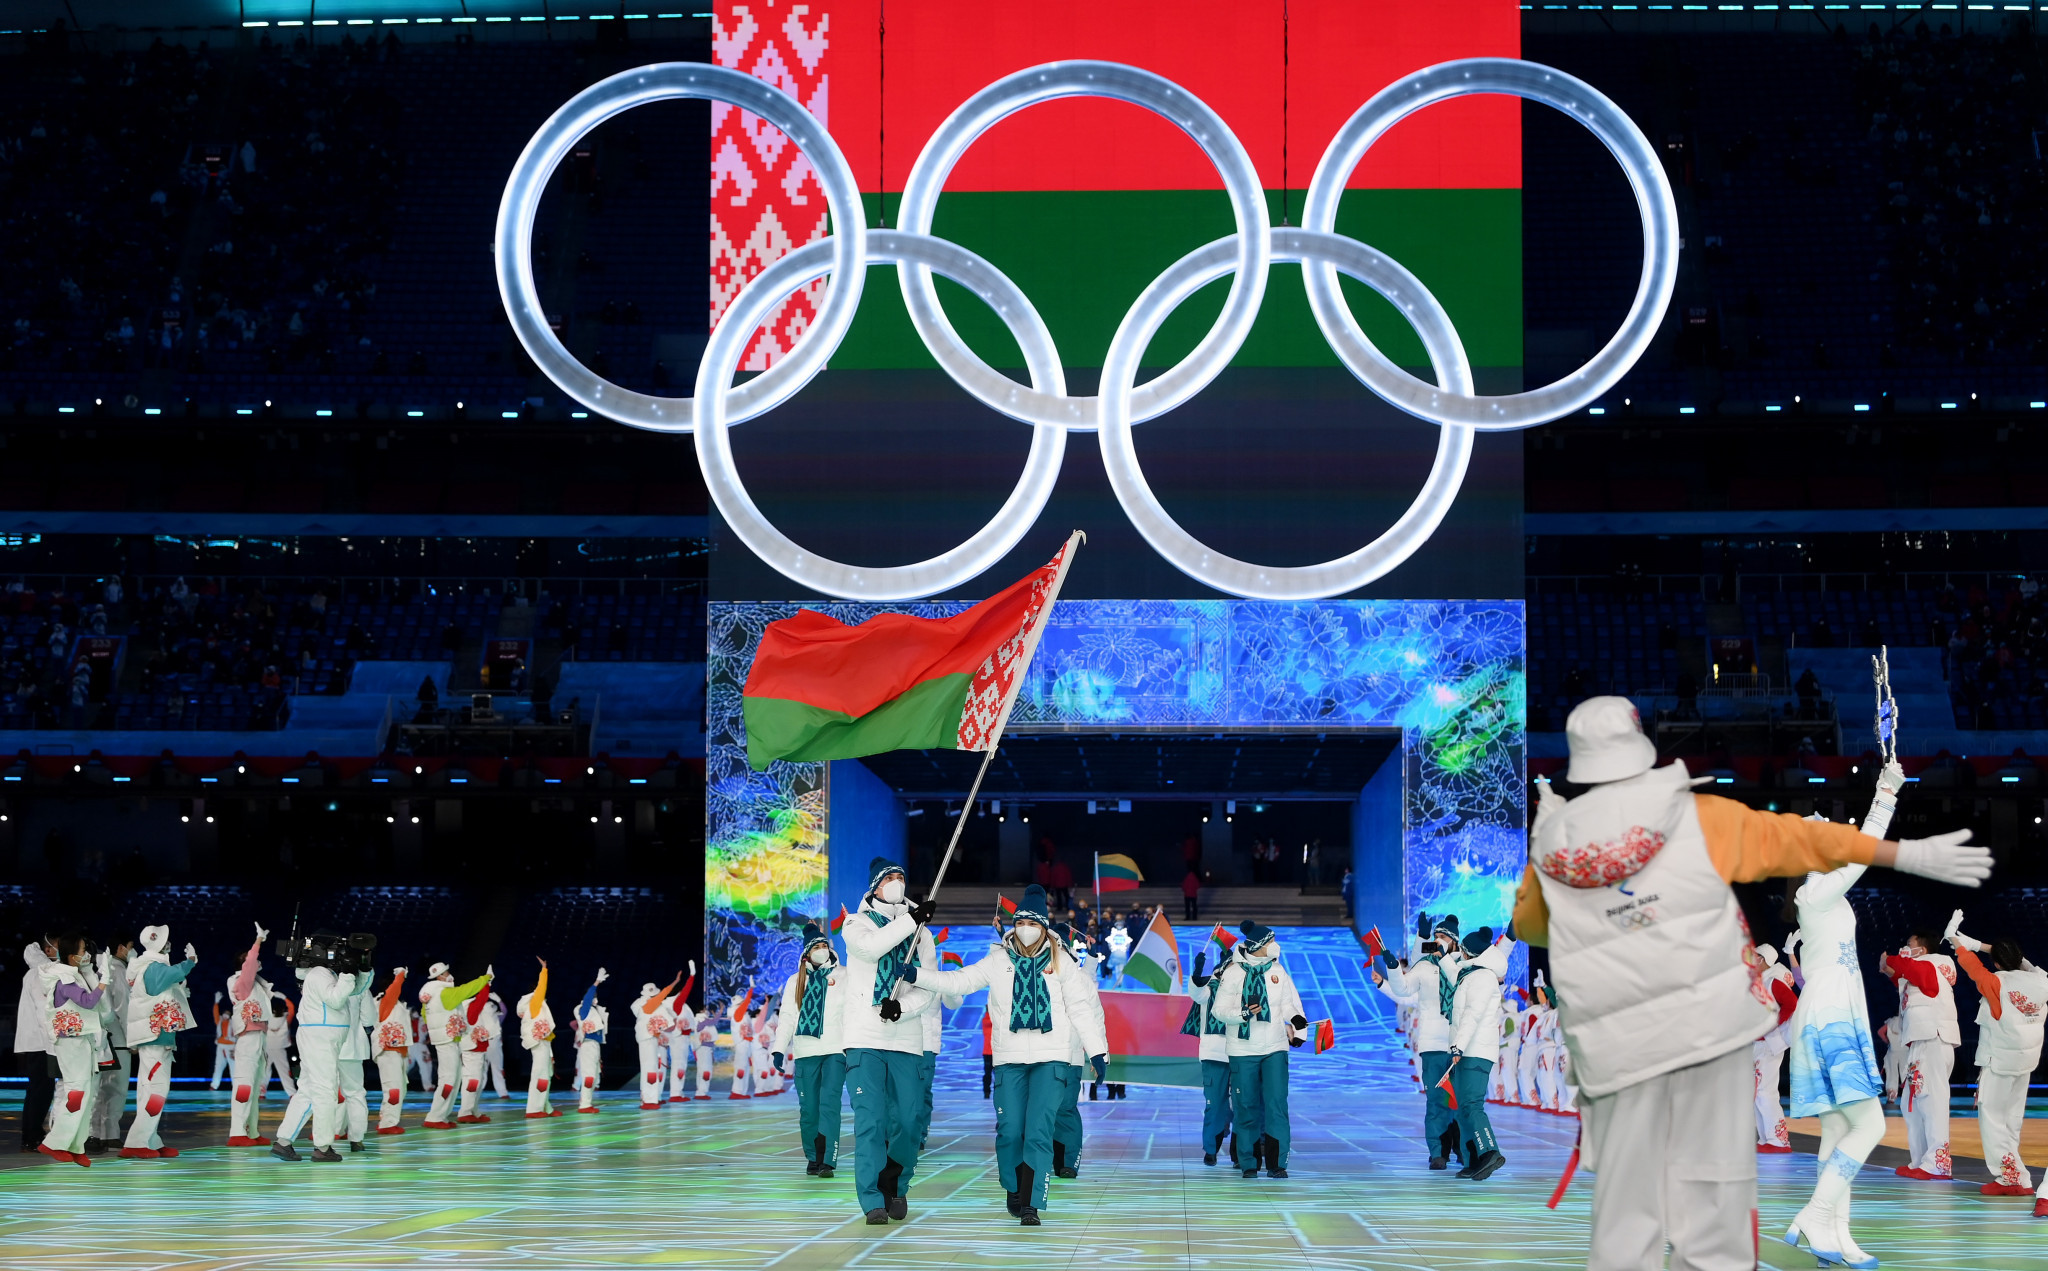 The United States Government announced that it is imposing visa restrictions on Belarusians officials tried to forcibly get Krystsina Tsimanouskaya to leave Tokyo 2020 last year ©Getty Images